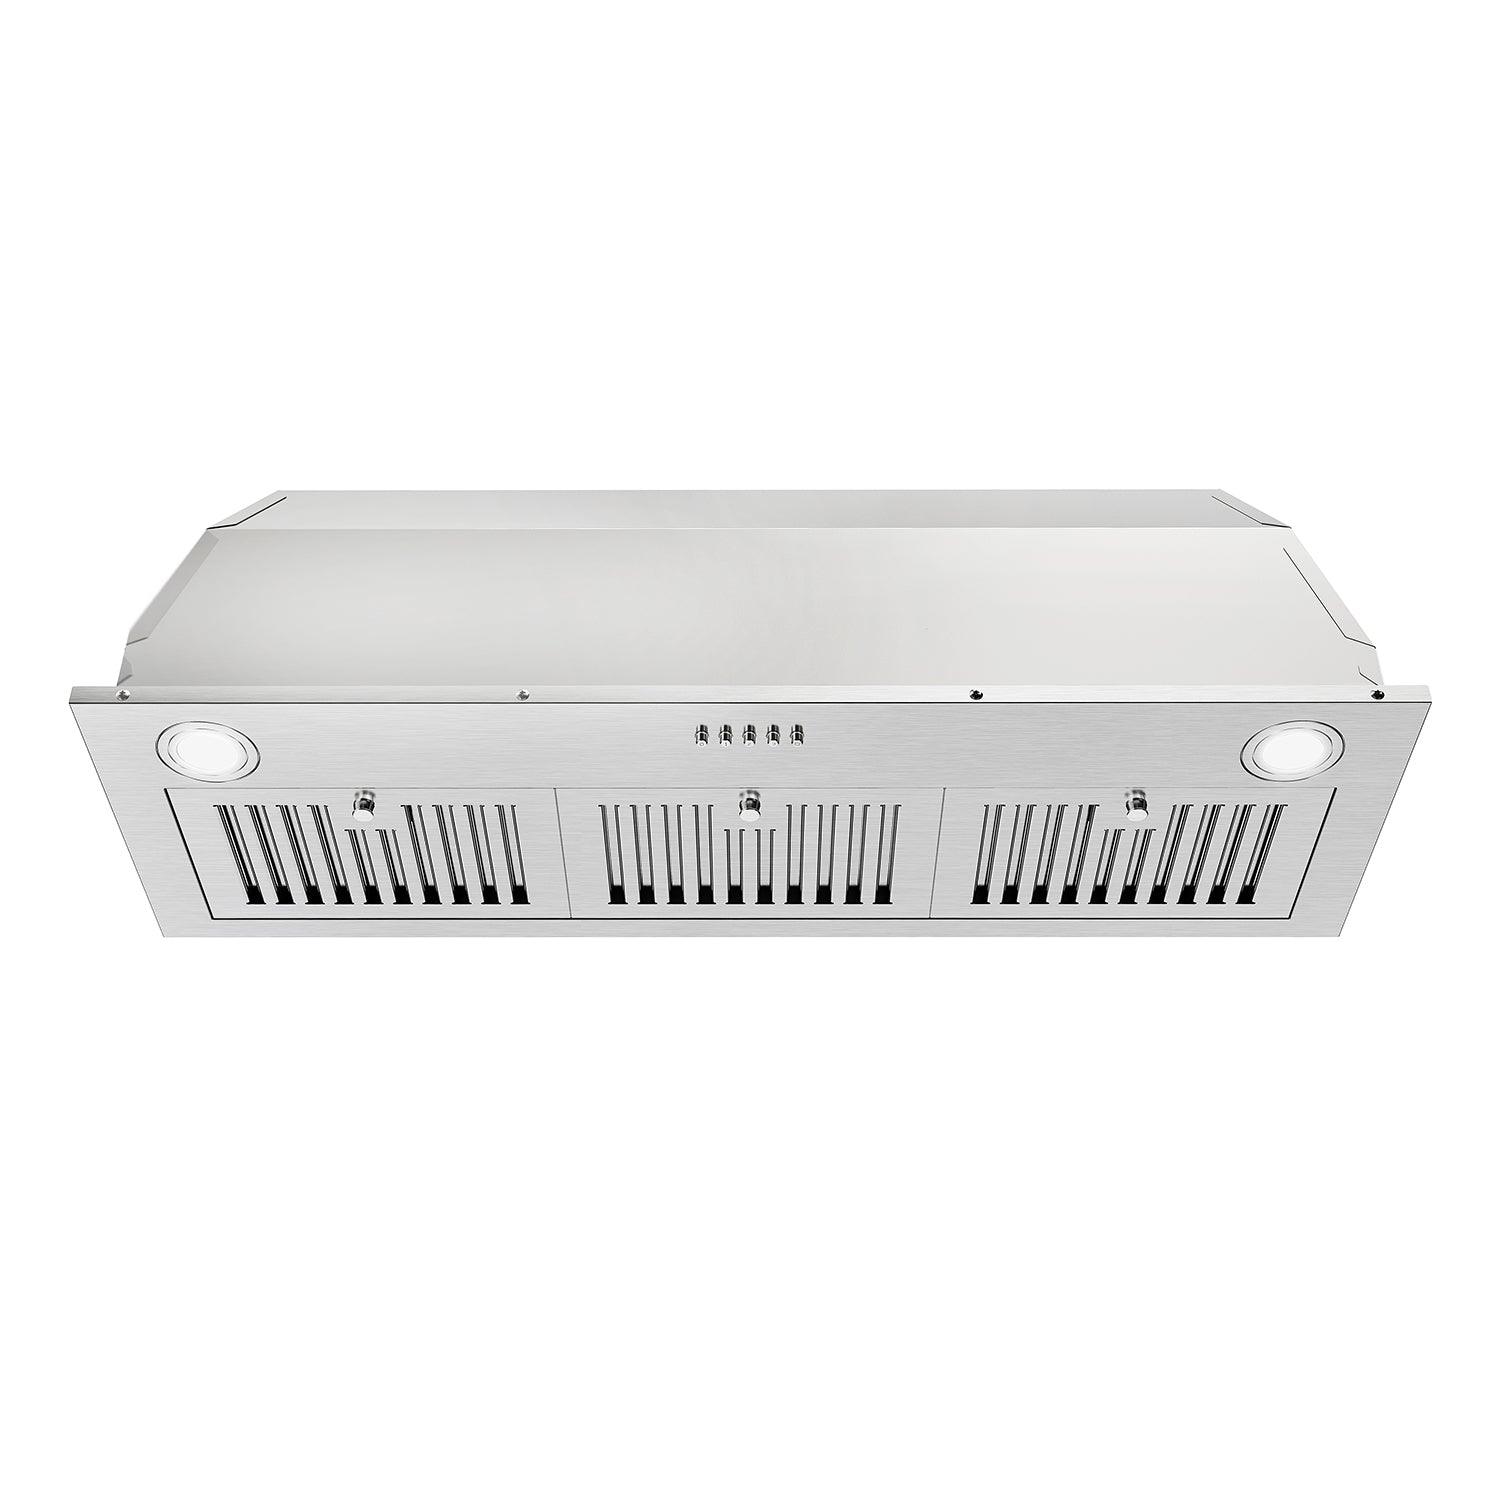 Tieasy 36 Inch 600CFM Built-in Range Hood Competent for Heavy-Duty Cooking